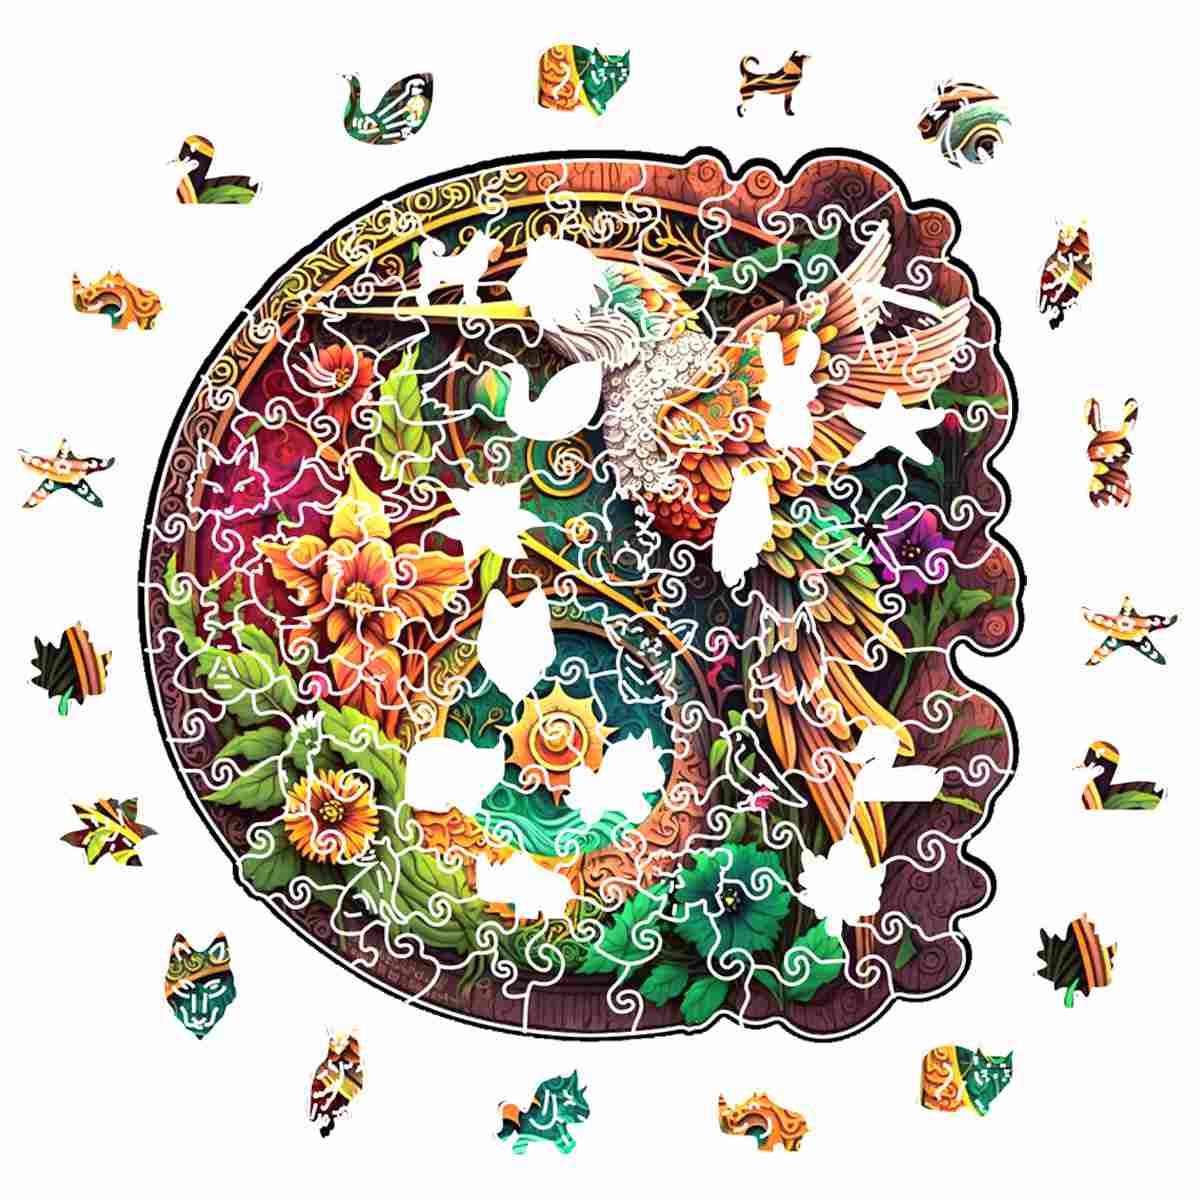 Animal Jigsaw Puzzle > Wooden Jigsaw Puzzle > Jigsaw Puzzle Nectar Quest Hummingbird - Jigsaw Puzzle